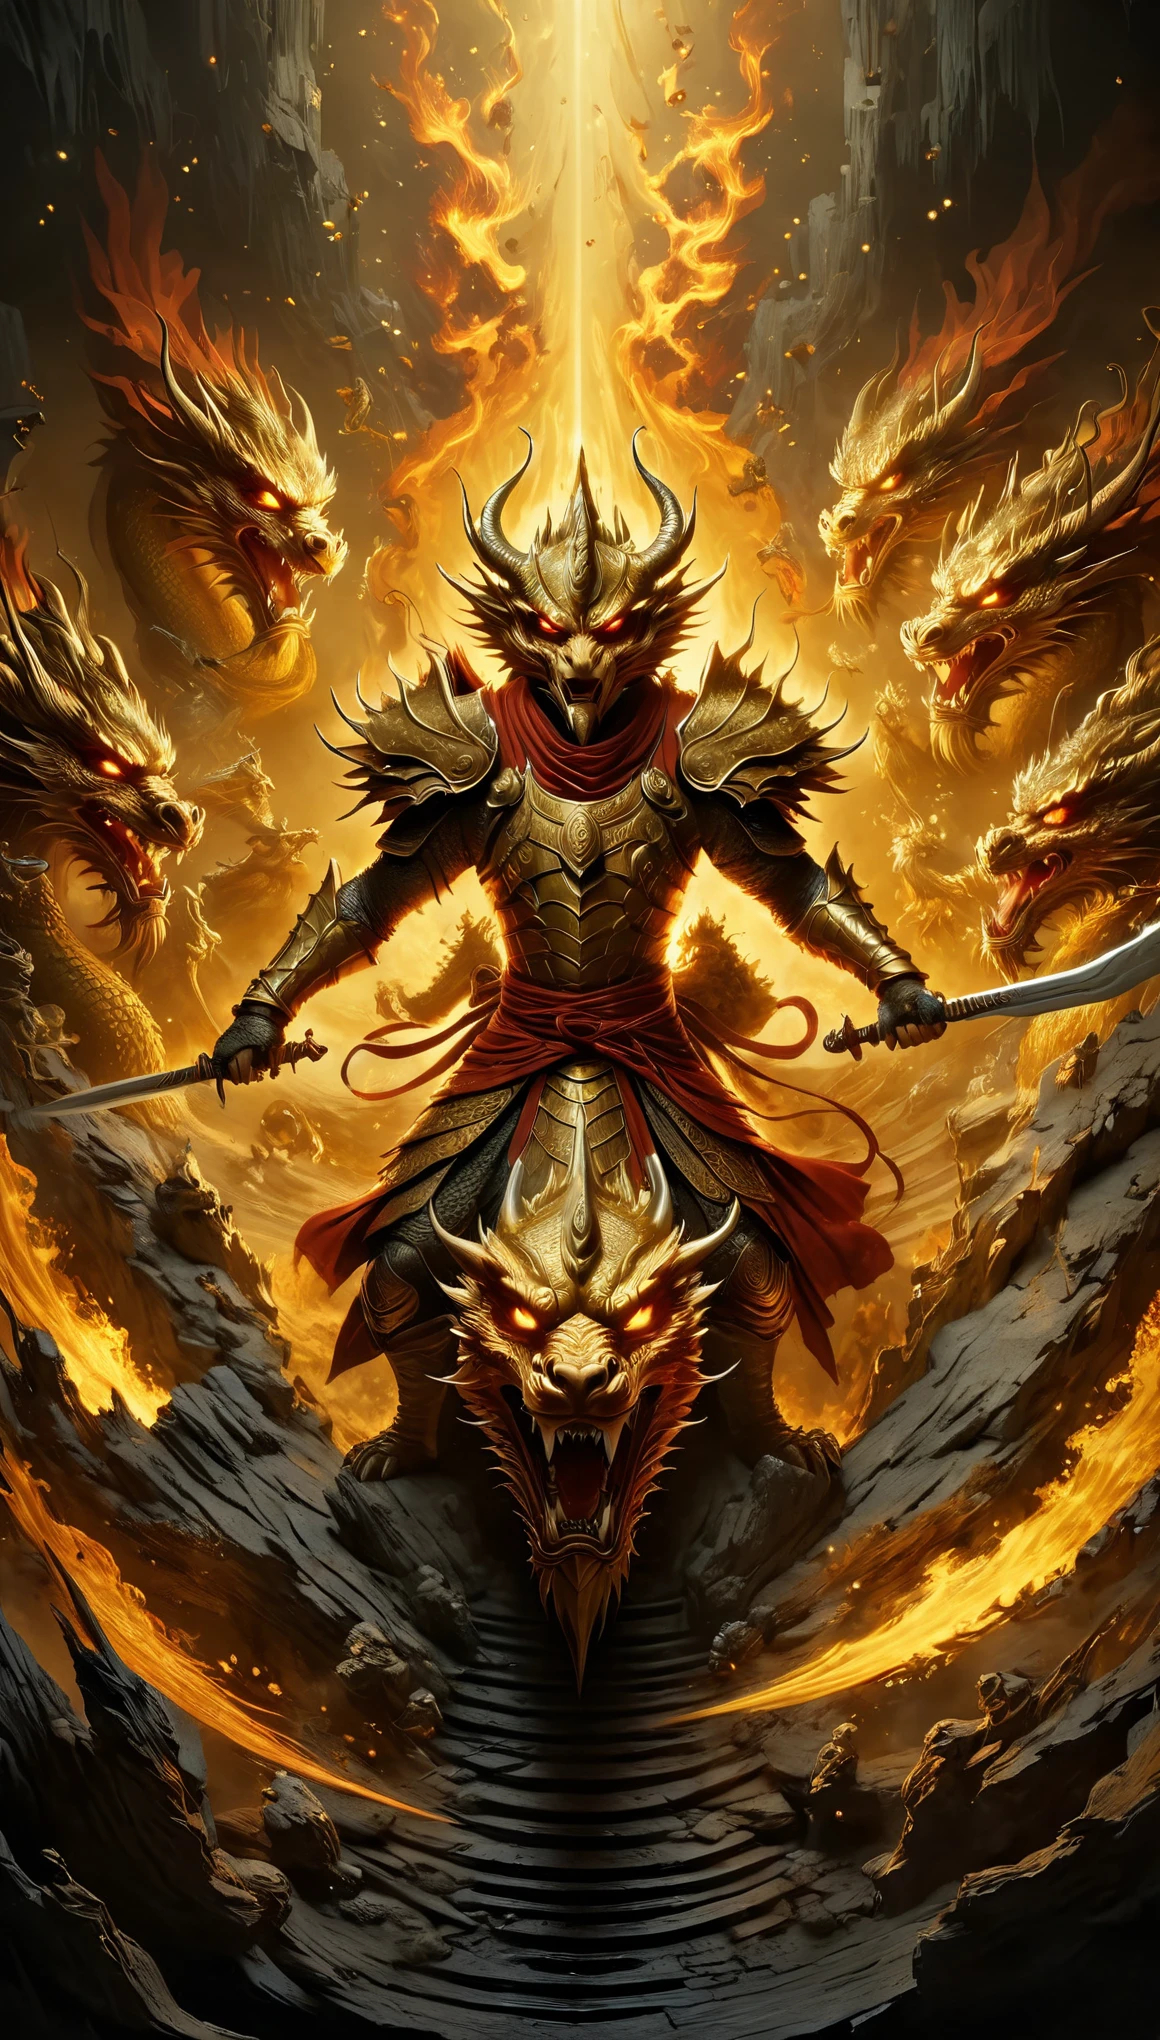 top view，(anthropomorphic Chinese dragon warrior in golden armor fighting enemies), sword swinging through dungeon roofs, red flames of hell, rubble flying, explosions, epic footage, iper quality, iper detail, intricate detail, octan rendering, cinema, standing facing the viewer, mythological creatures, hermits, conceptual art, wide angle, full composition, dynamic lighting, film